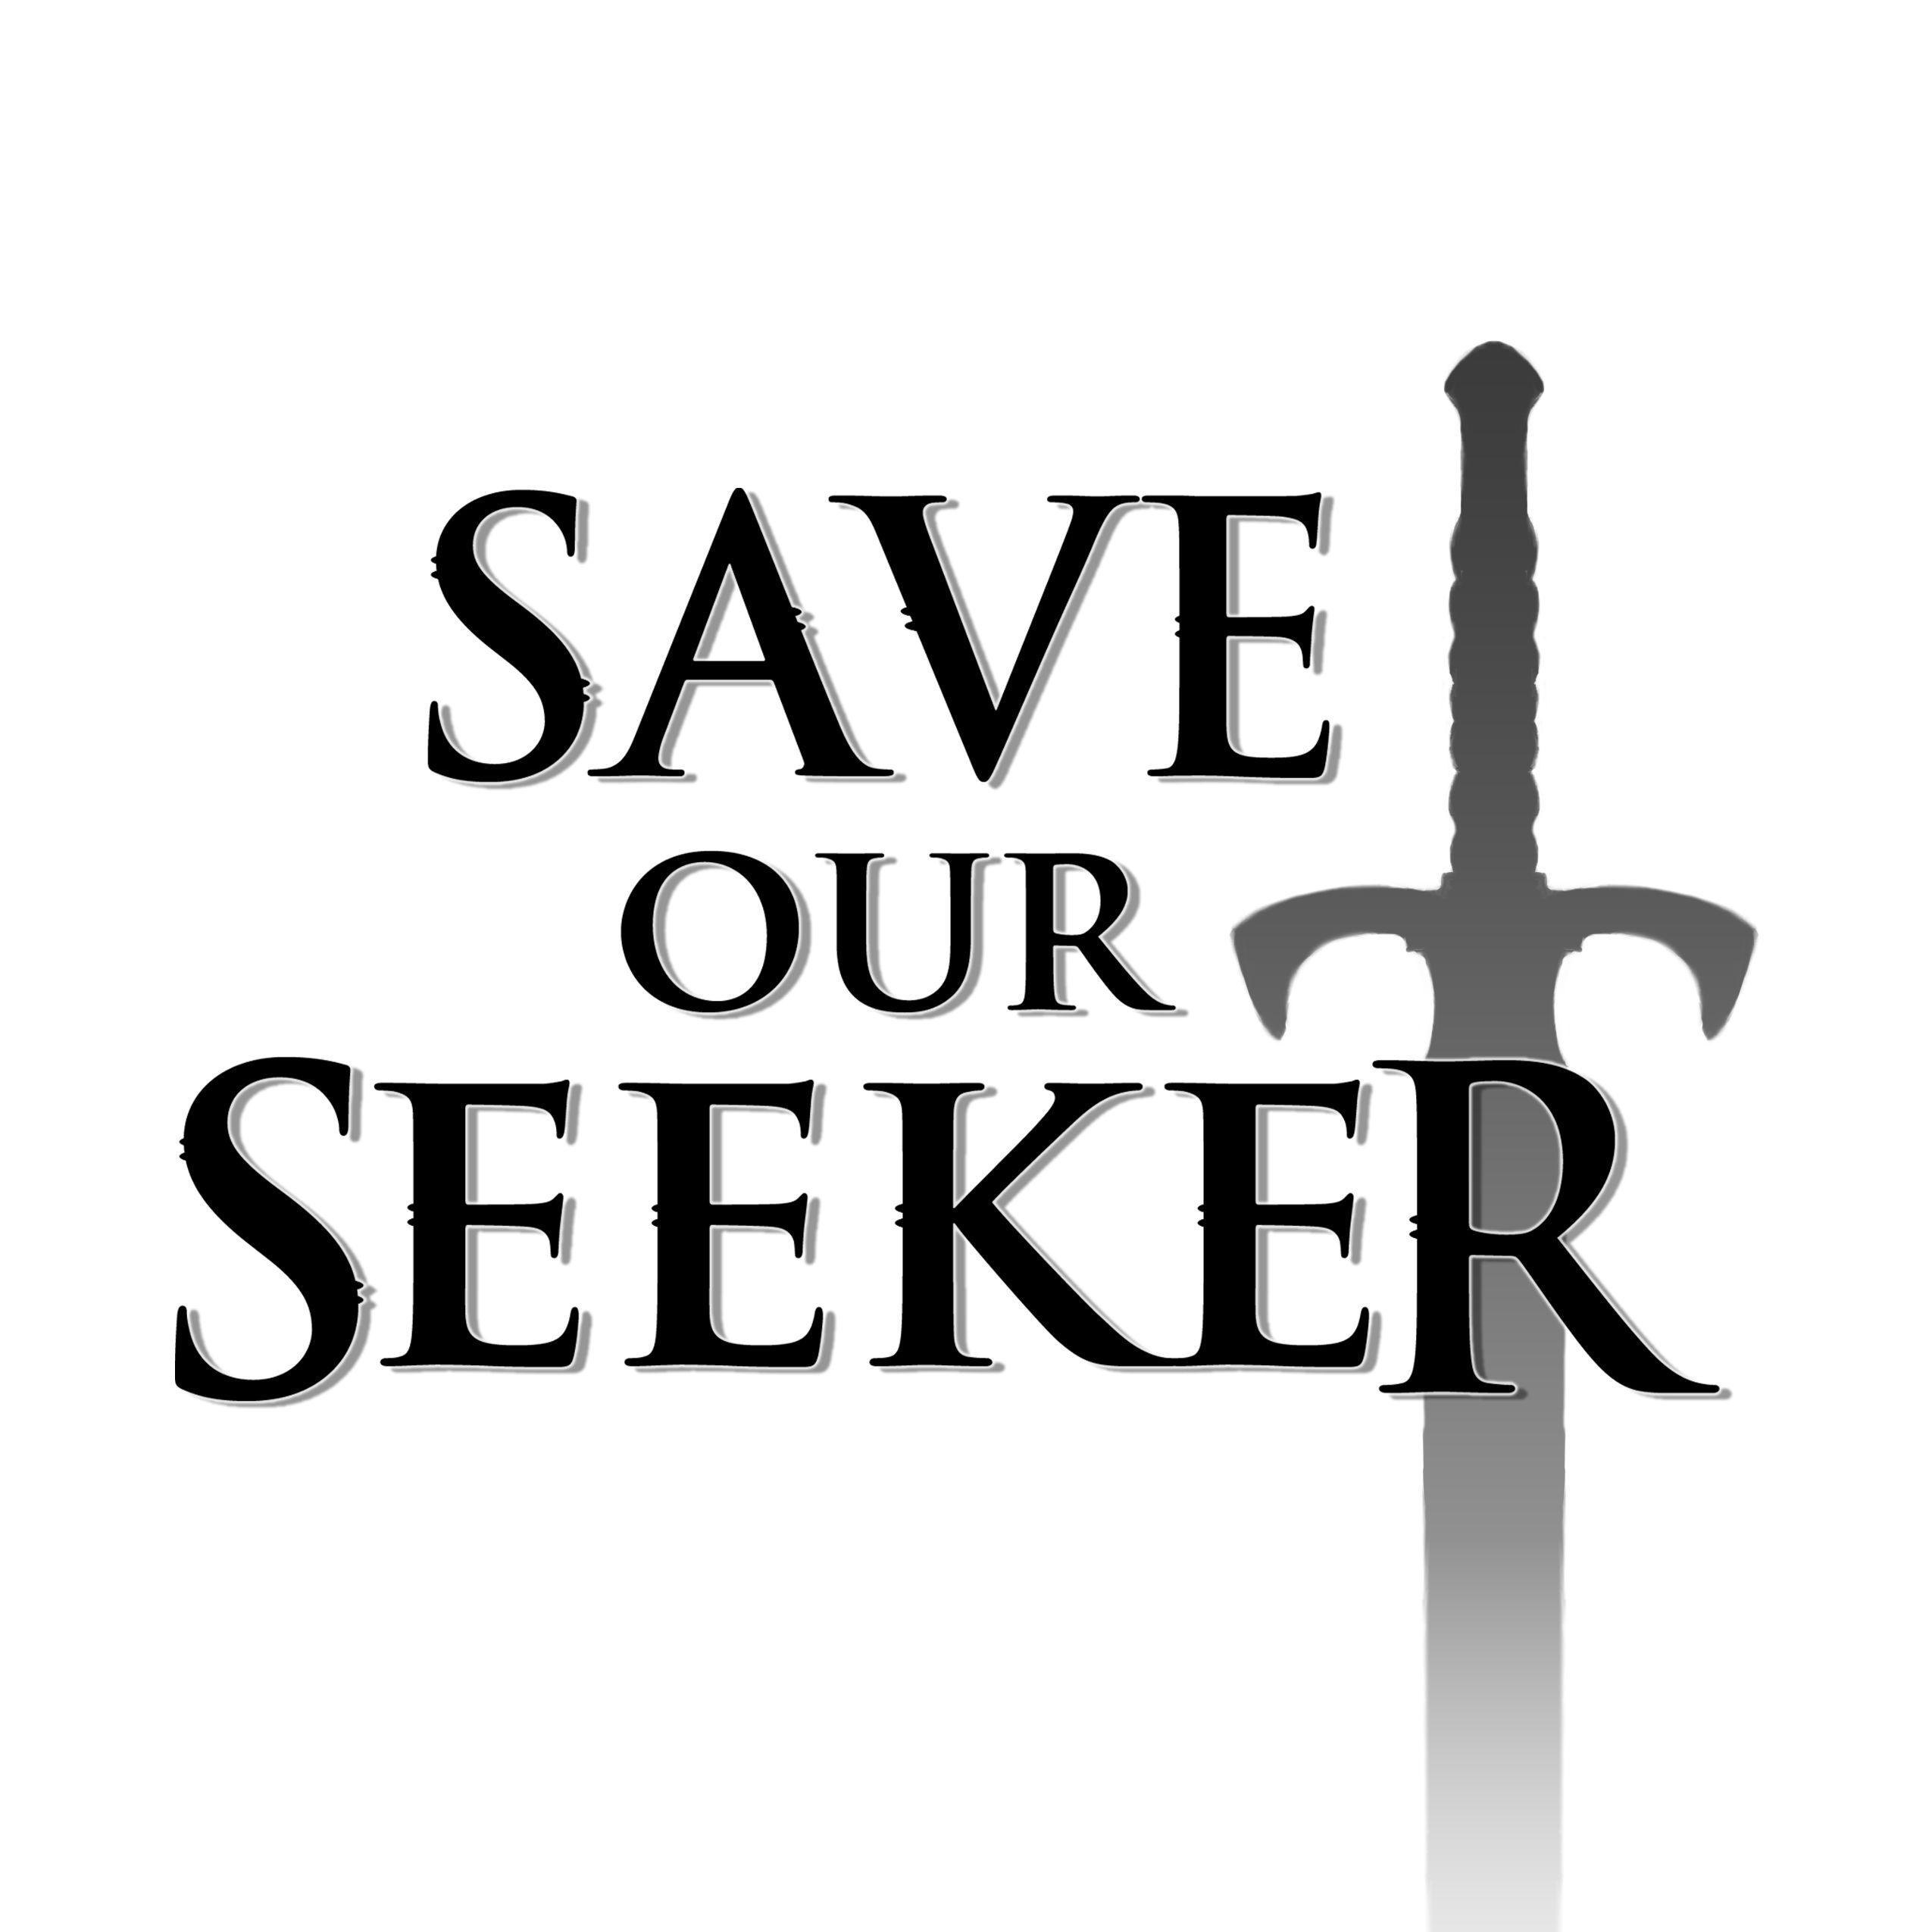 Seeker Logo - Store set up to support the Legend of the Seeker rallies. Rallying